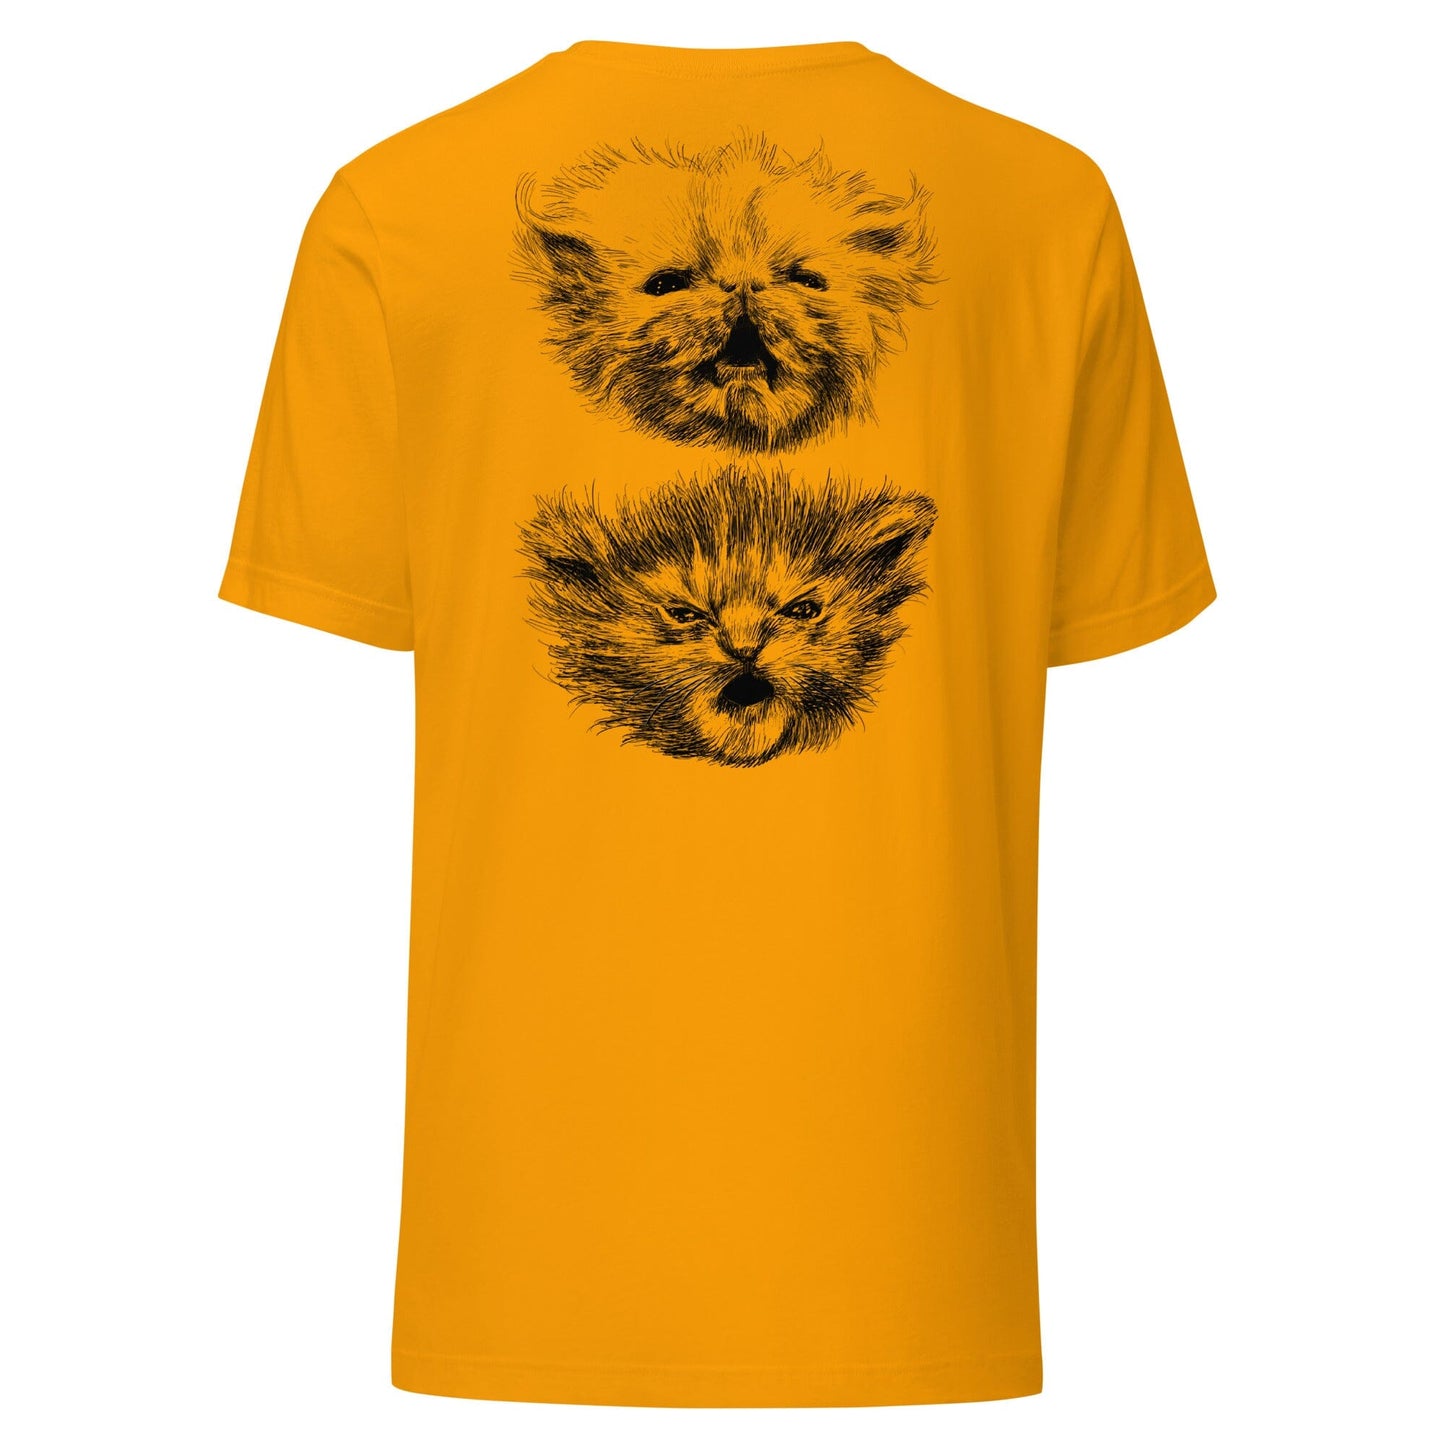 WispTot T-Shirt (Extended Sizing) [Unfoiled] (All net proceeds go to equally to Kitty CrusAIDe and Rags to Riches Animal Rescue) JoyousJoyfulJoyness 